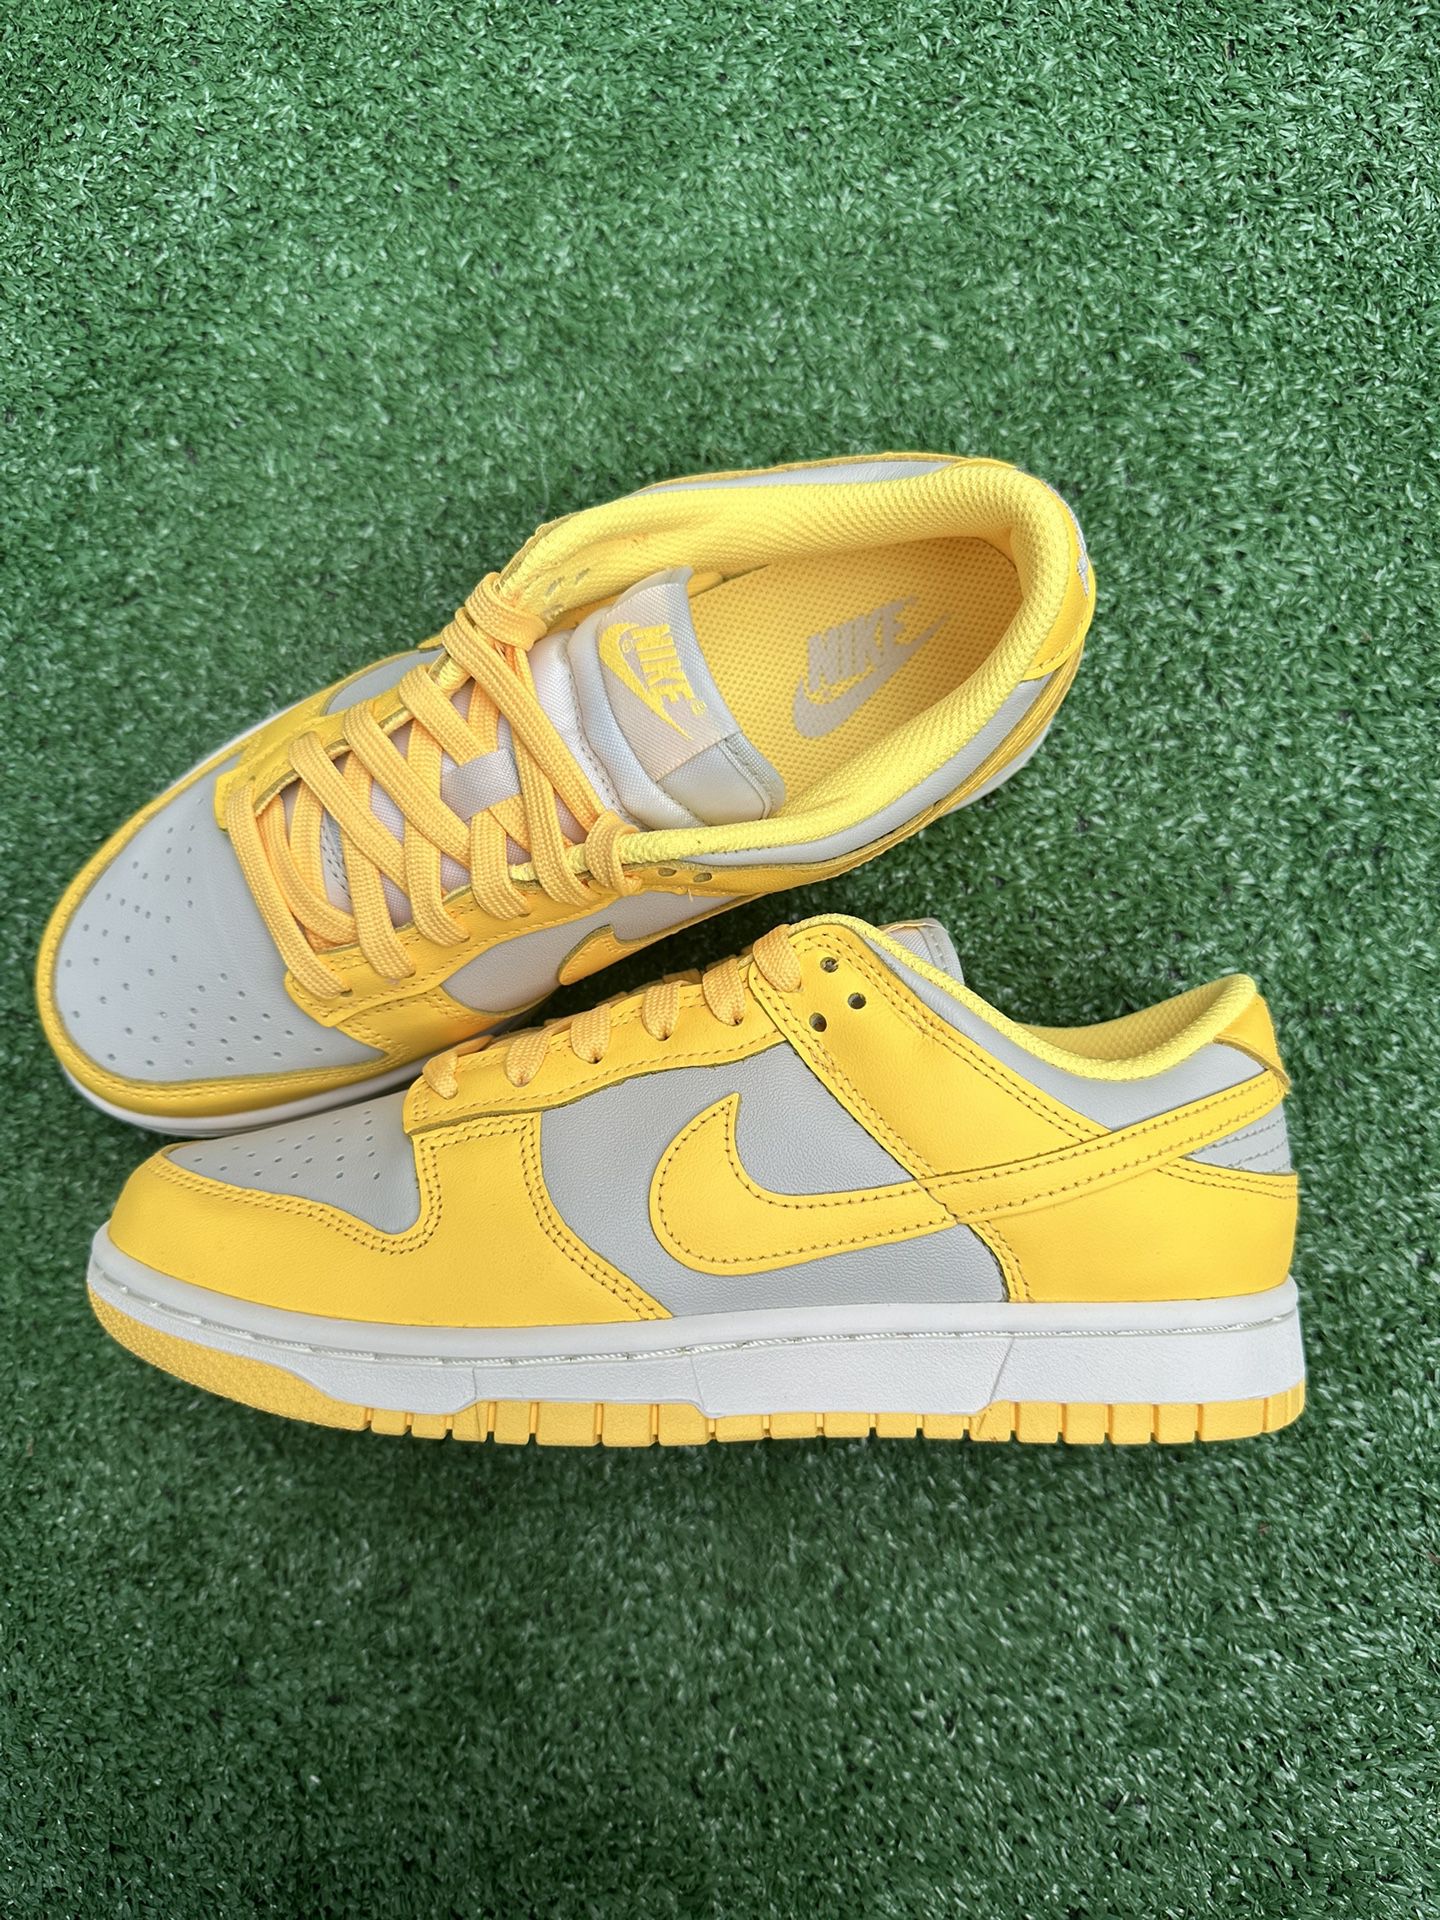 Dunk Low peach yellow 